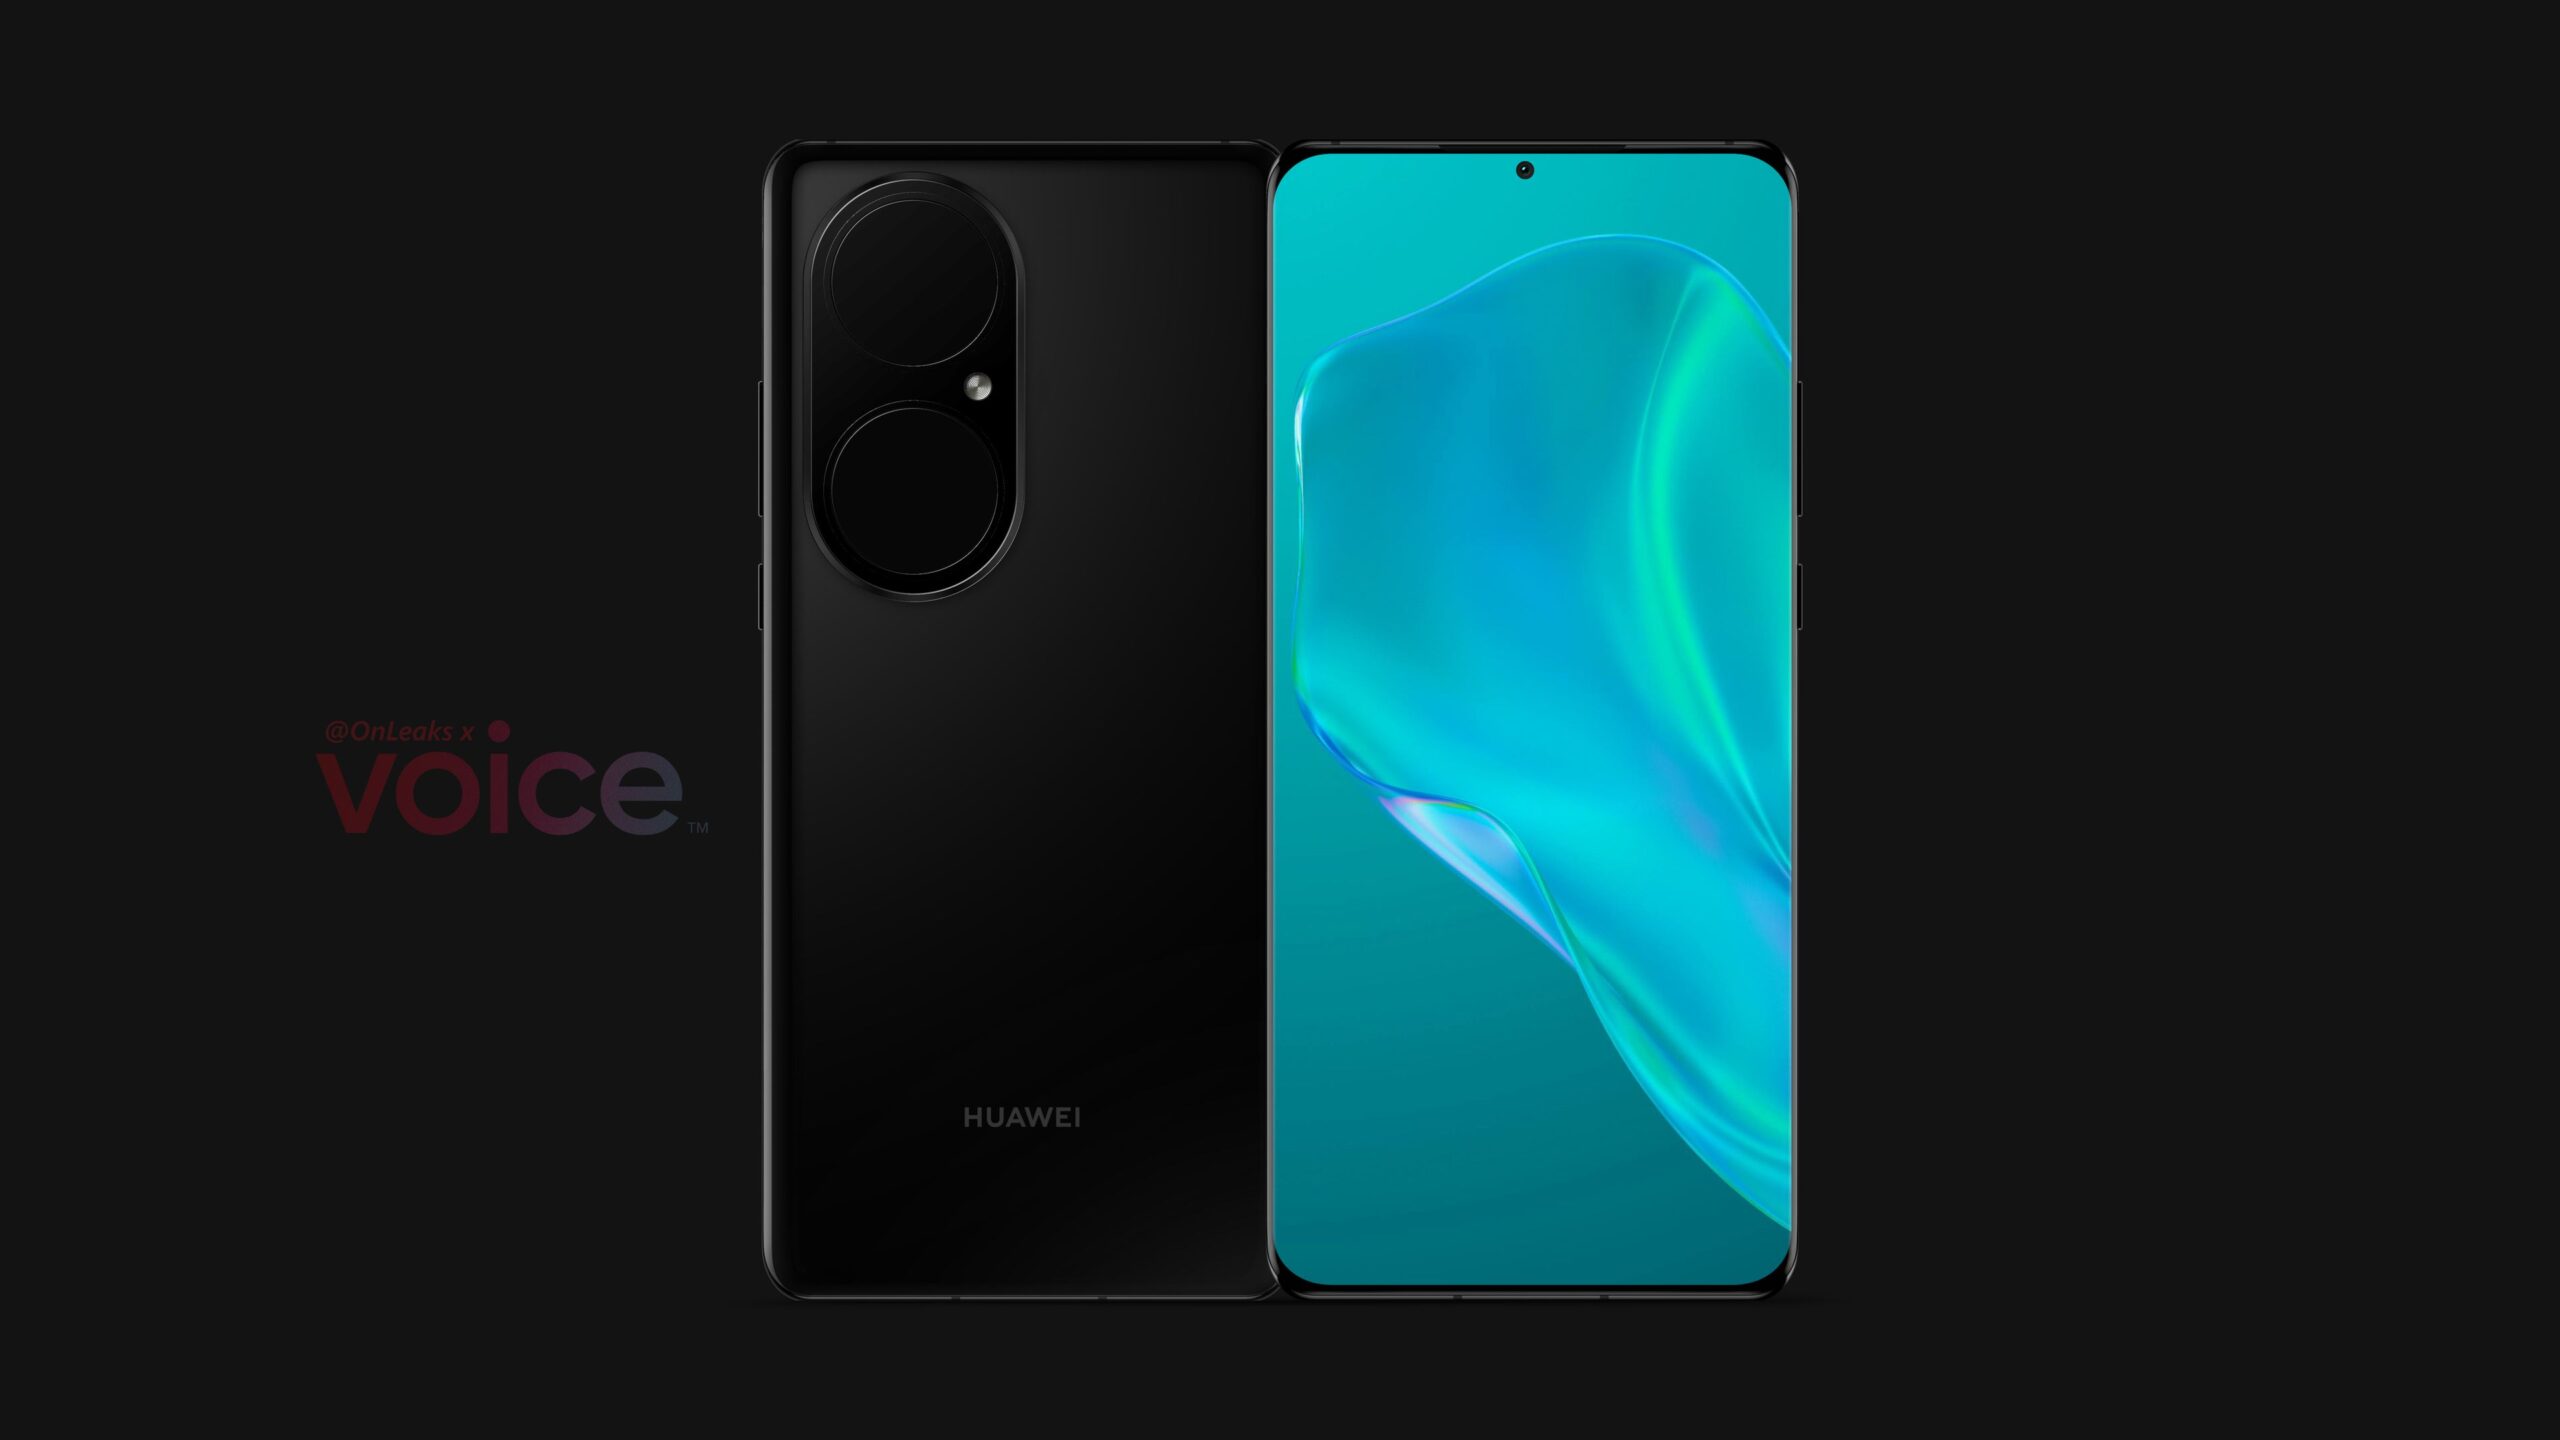 Huawei P50 Pro CAD renders reveals unique rear camera design, display with ultra-thin bezels